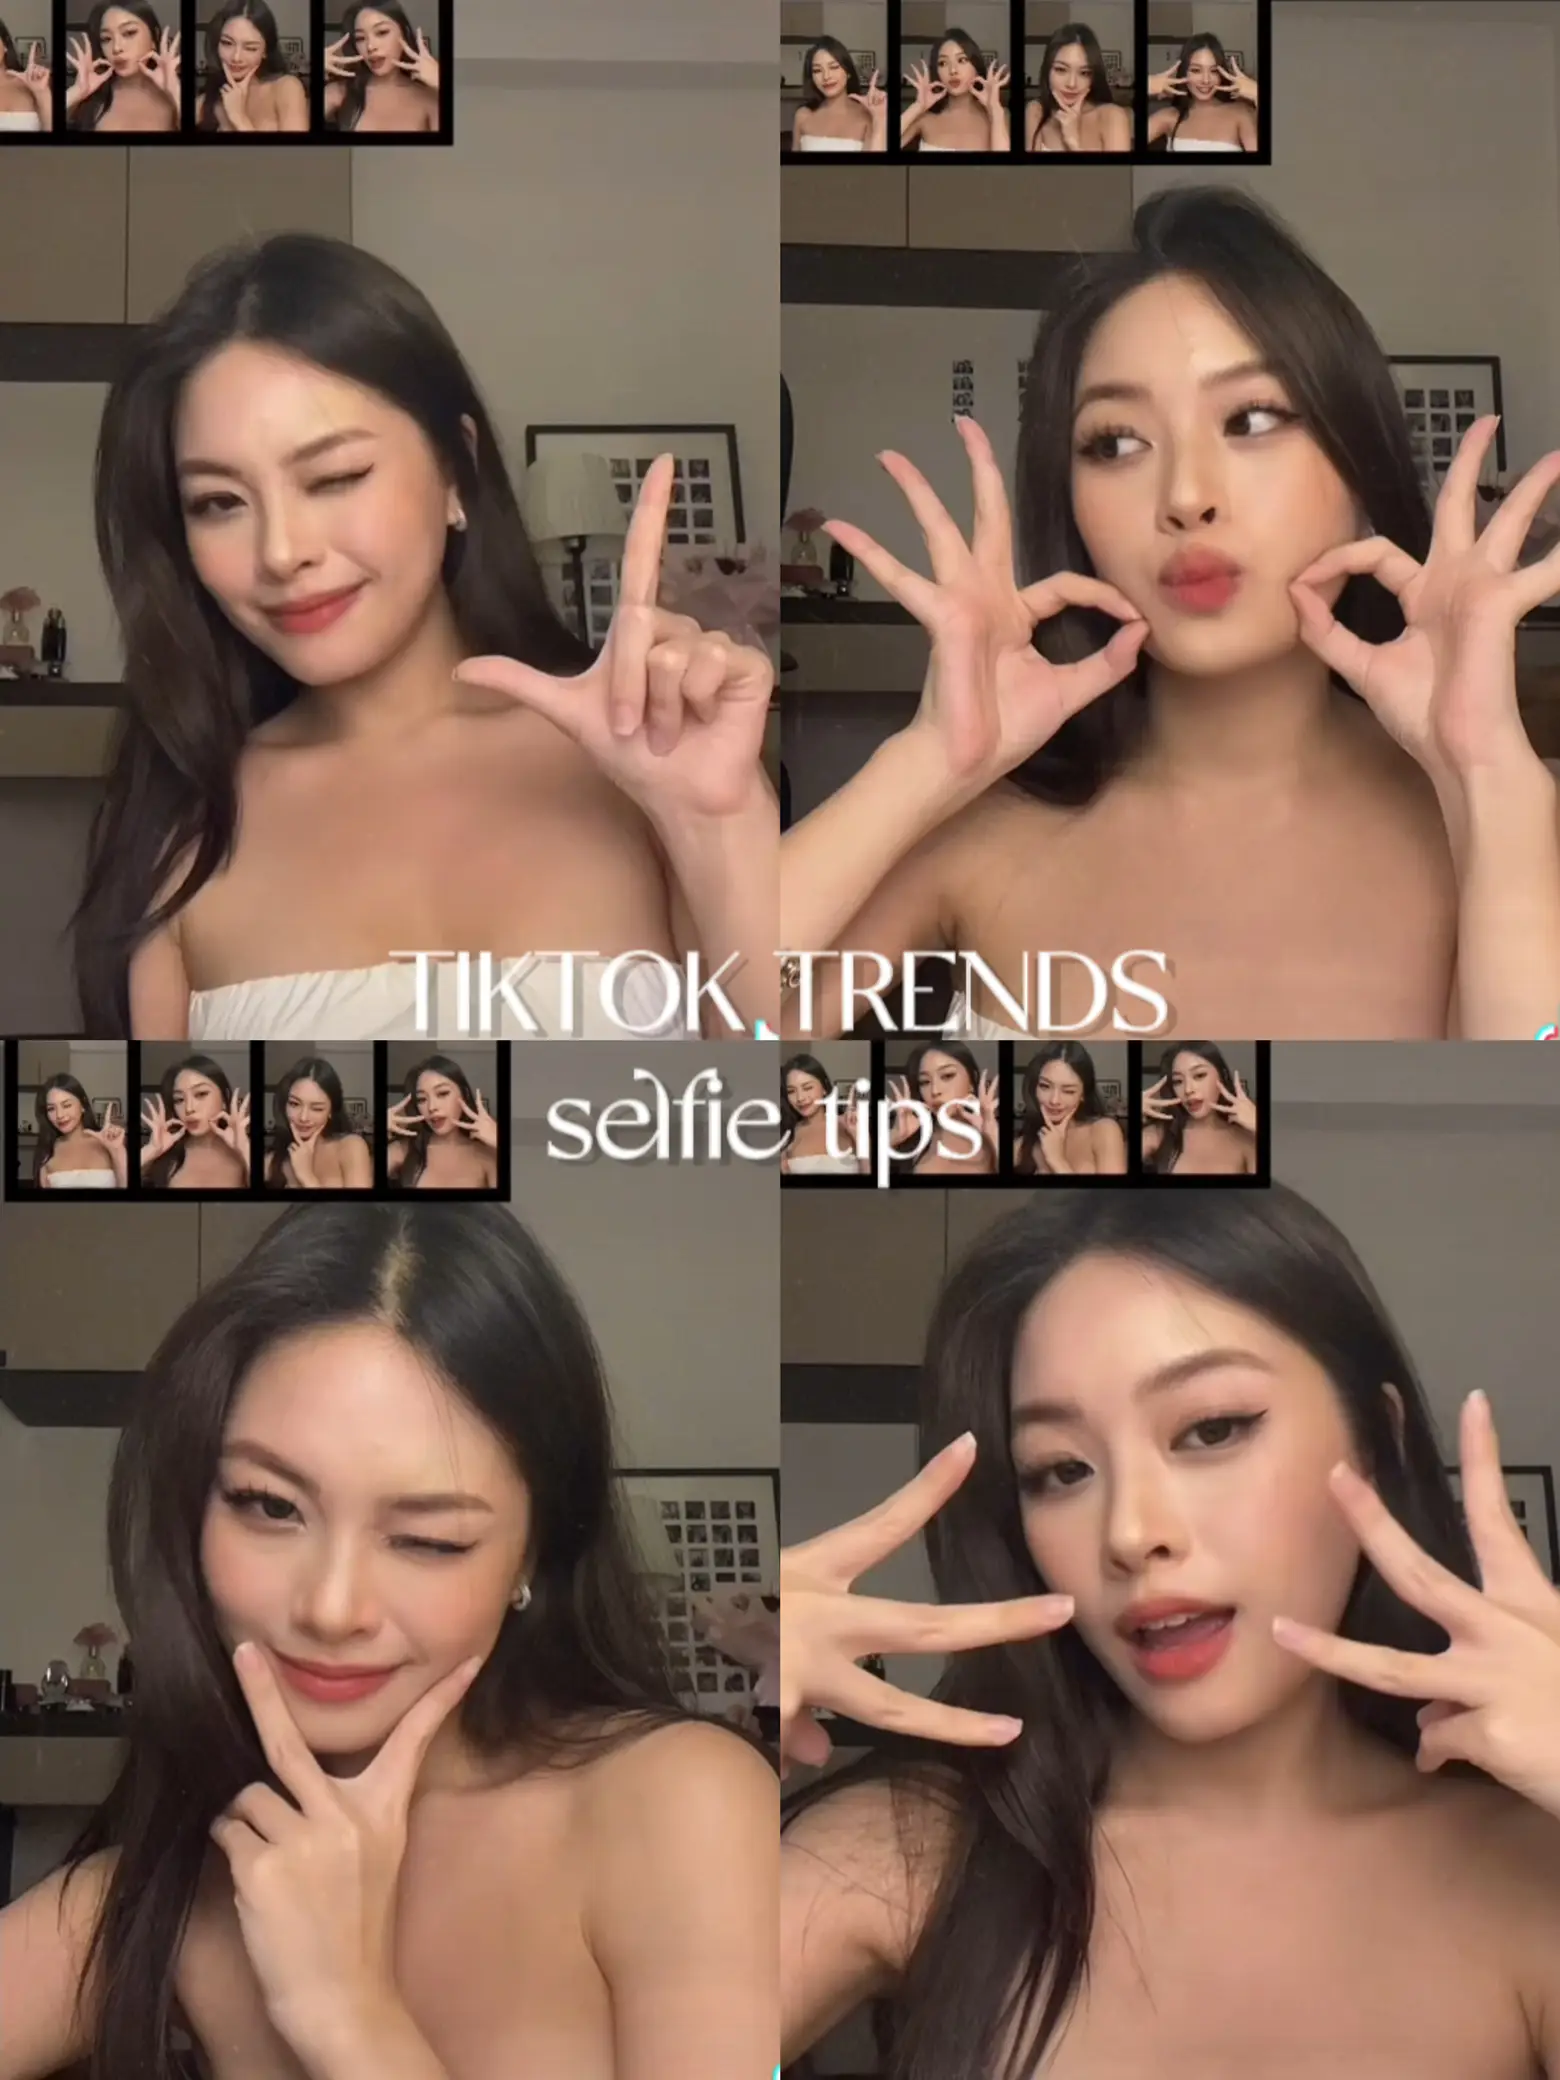 There Is Something So Ugly About TikTok's “Bunny Pretty” Trend